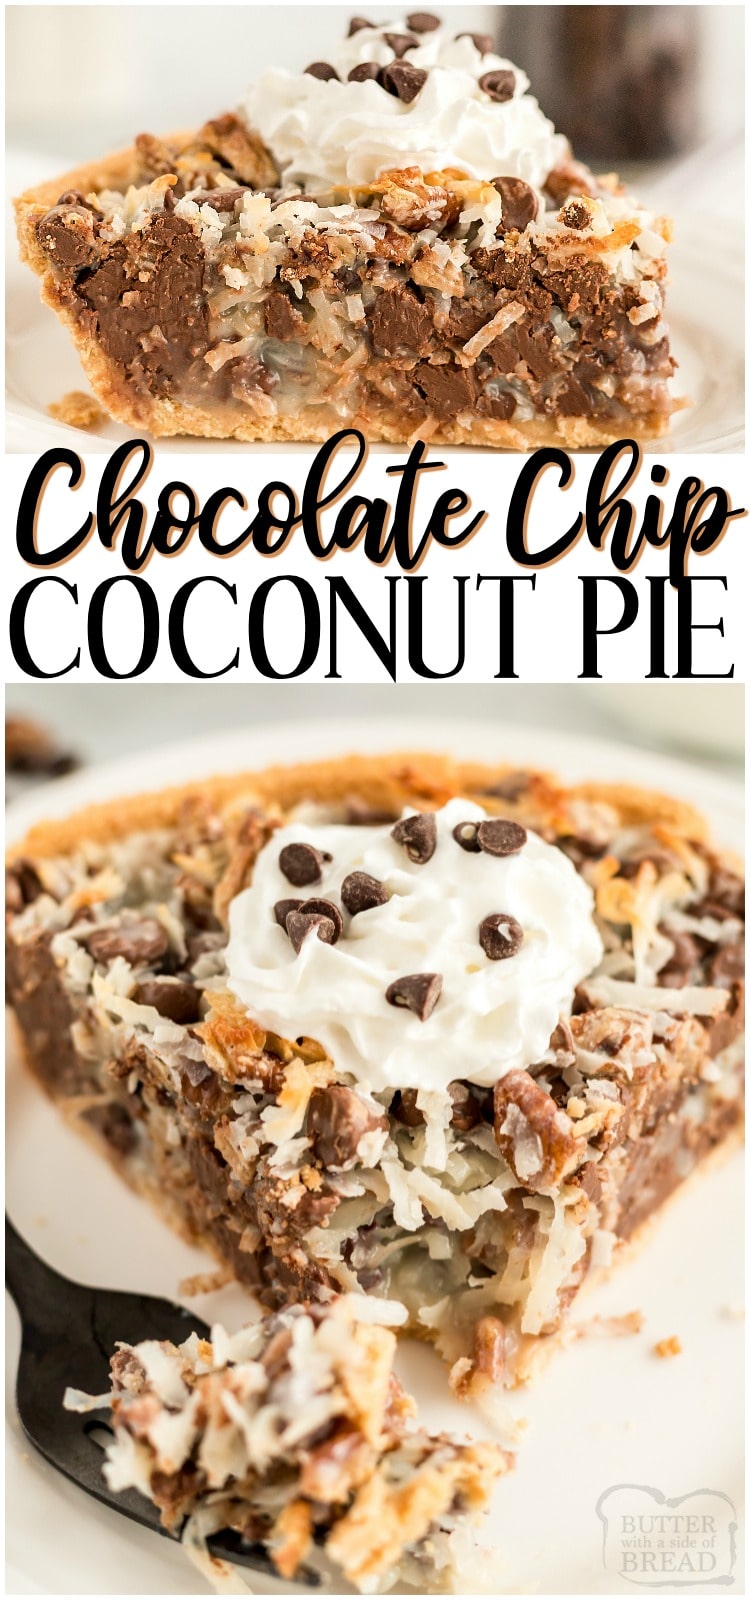 Chocolate chip coconut pie is a simple homemade pie made with just 6 ingredients! Easy chocolate coconut pie perfect for coconut lovers. #pie #chocolate #coconut #chocolatechip #easyrecipe #creampie #dessert from BUTTER WITH A SIDE OF BREAD